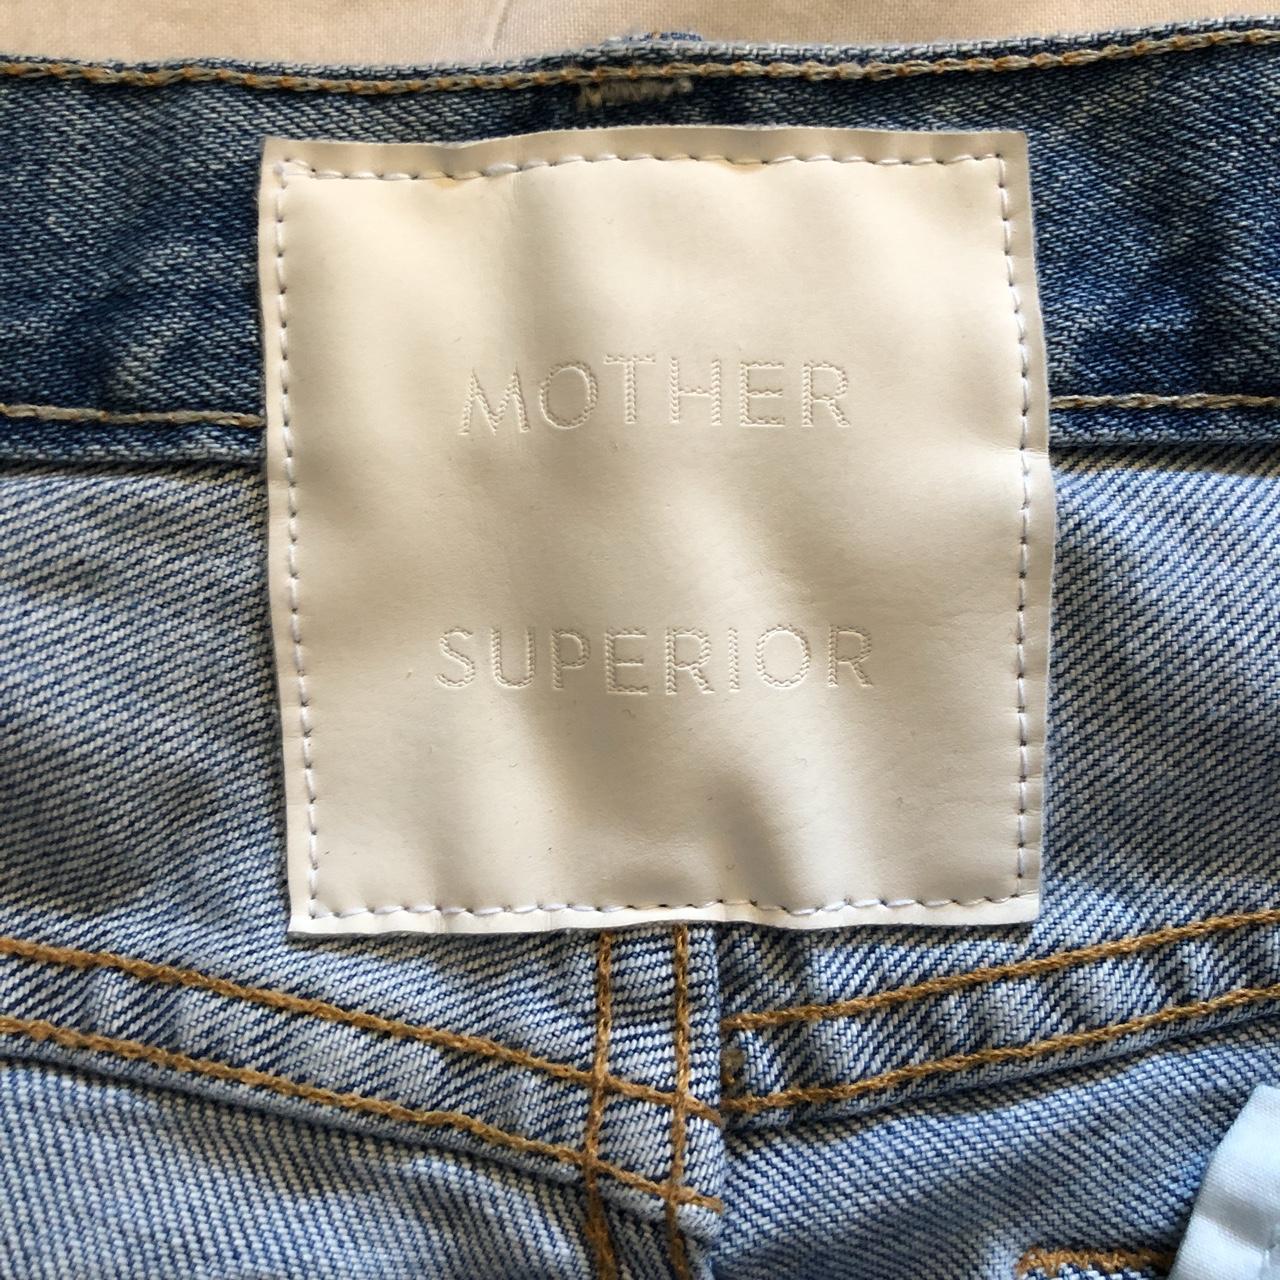 I thrifted a pair of mother jeans, and this is the only tag that's